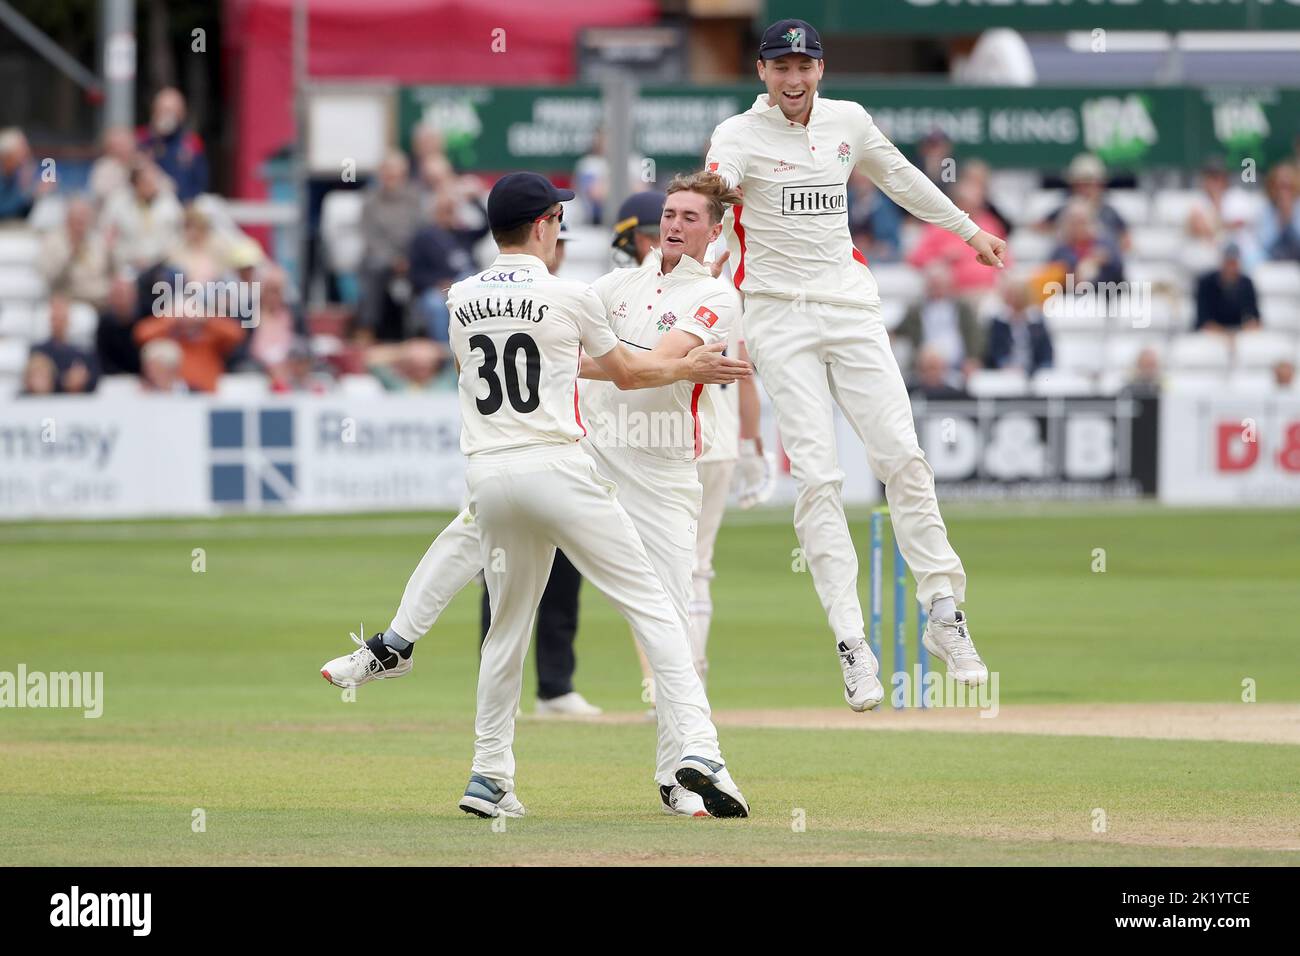 George Balderson of Lancashire celebrates with his team mates after taking the wicket of Matt Critchley to complete his hat-trick during Essex CCC vs Stock Photo